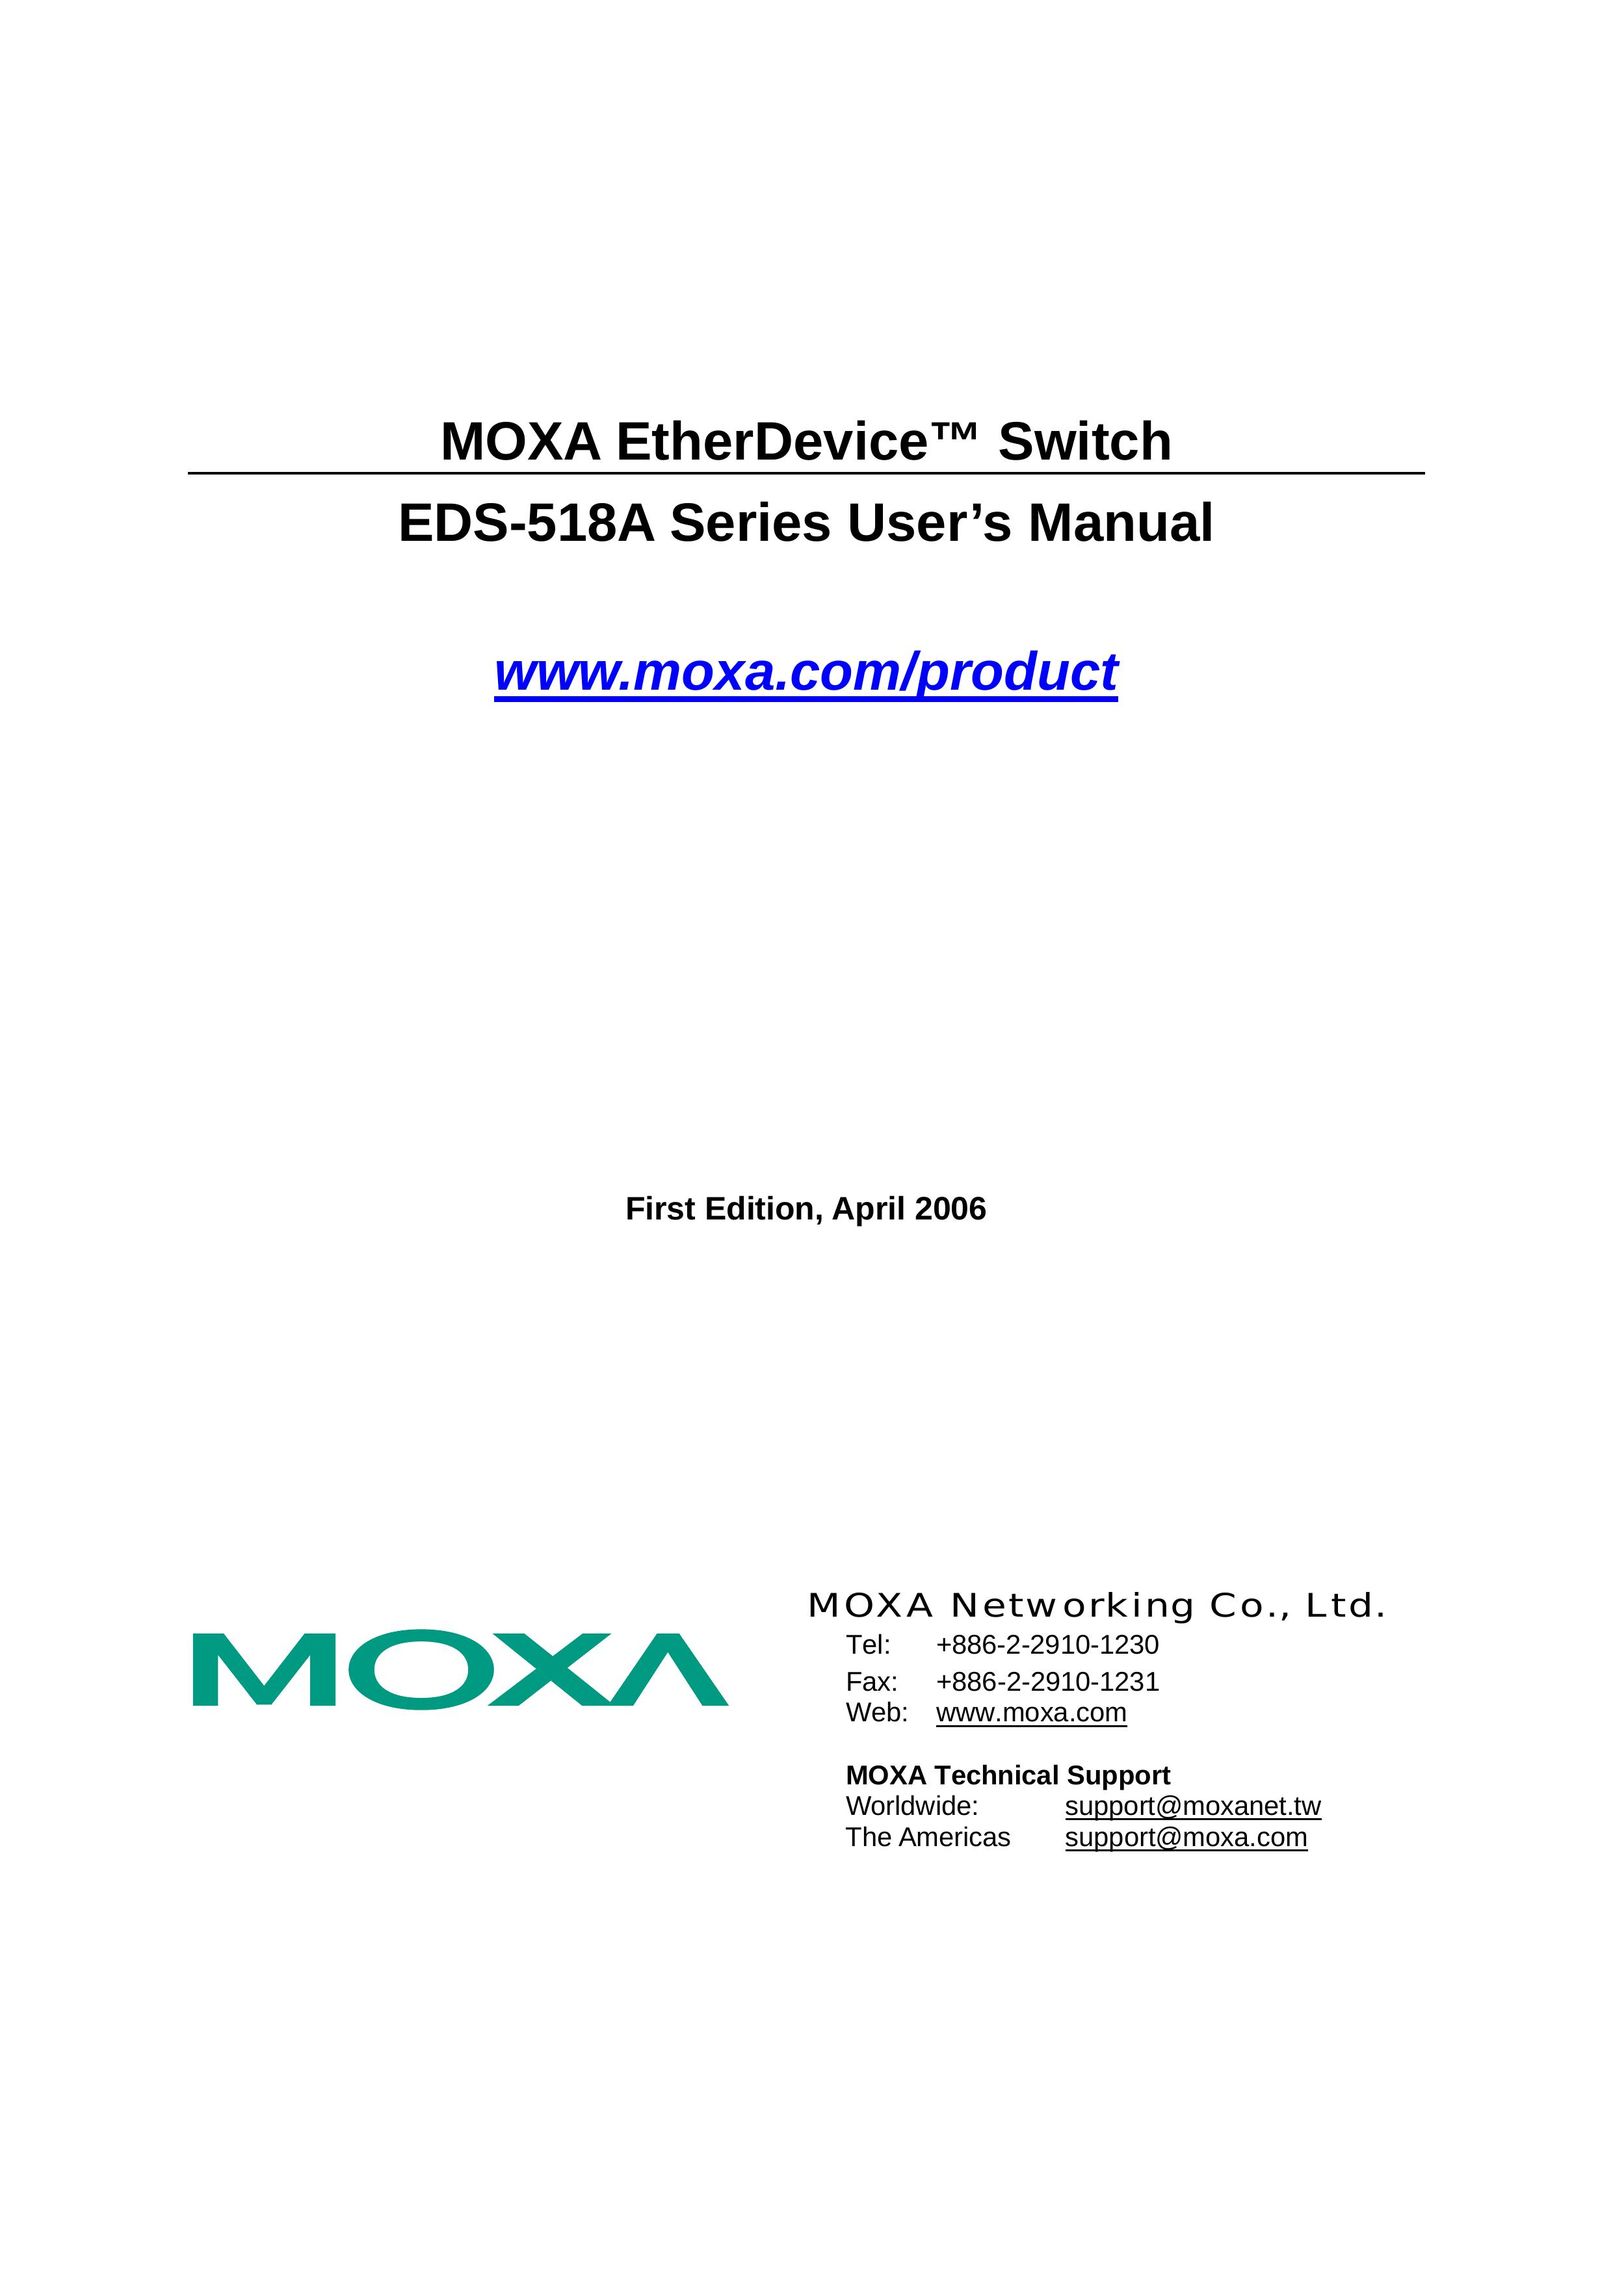 Moxa Technologies EDS-518A Series Switch User Manual